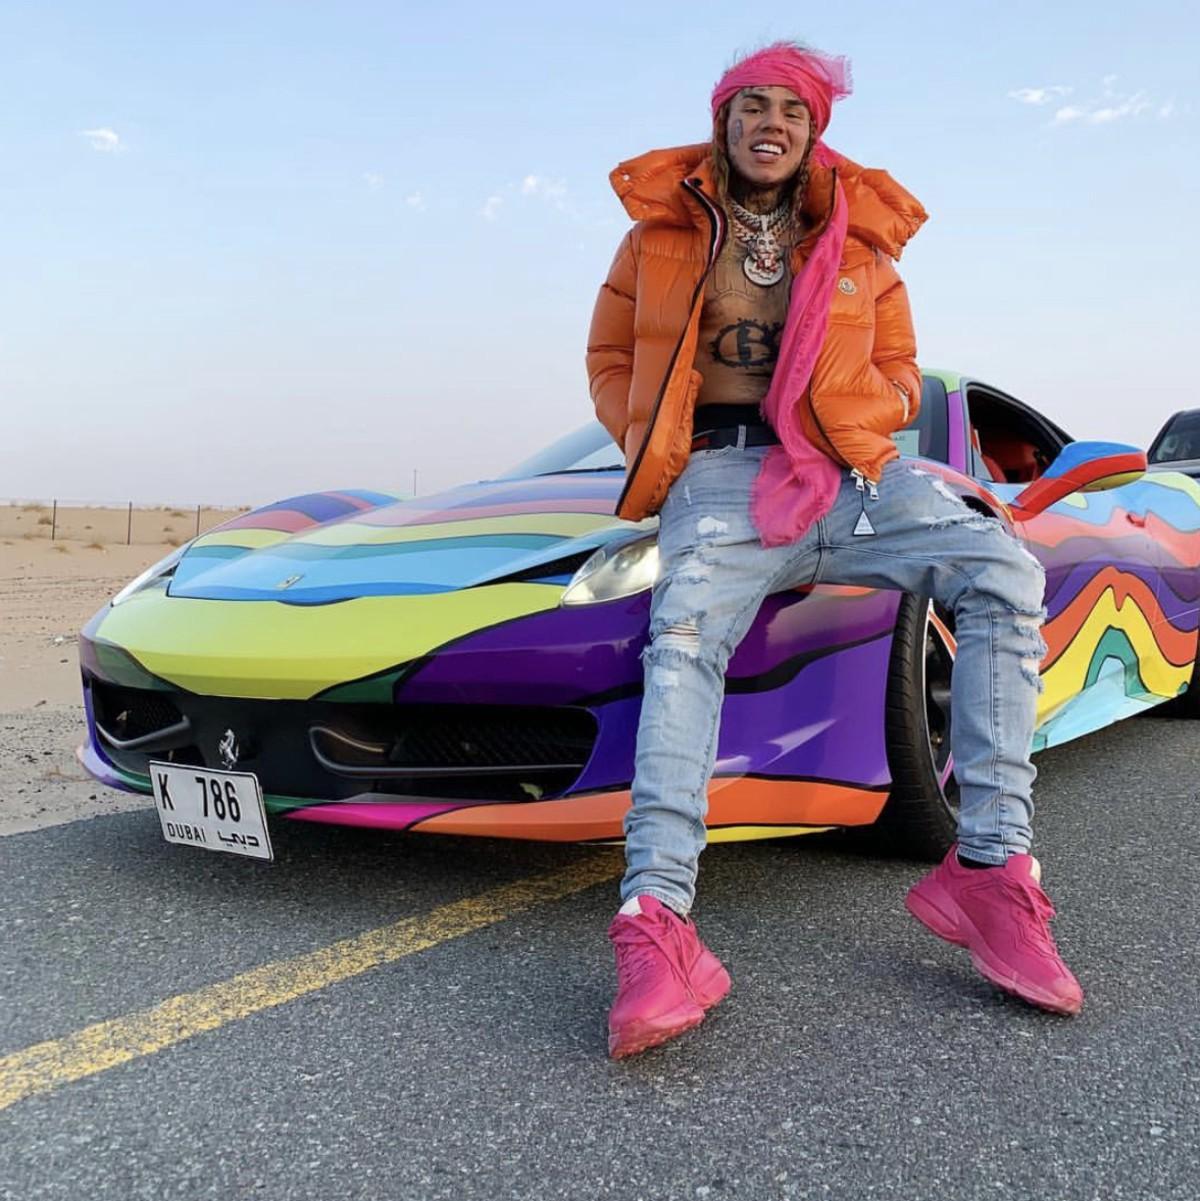 On The Inauthenticity Of Hip Hop, Tekashi 69 And The Impact On Youth